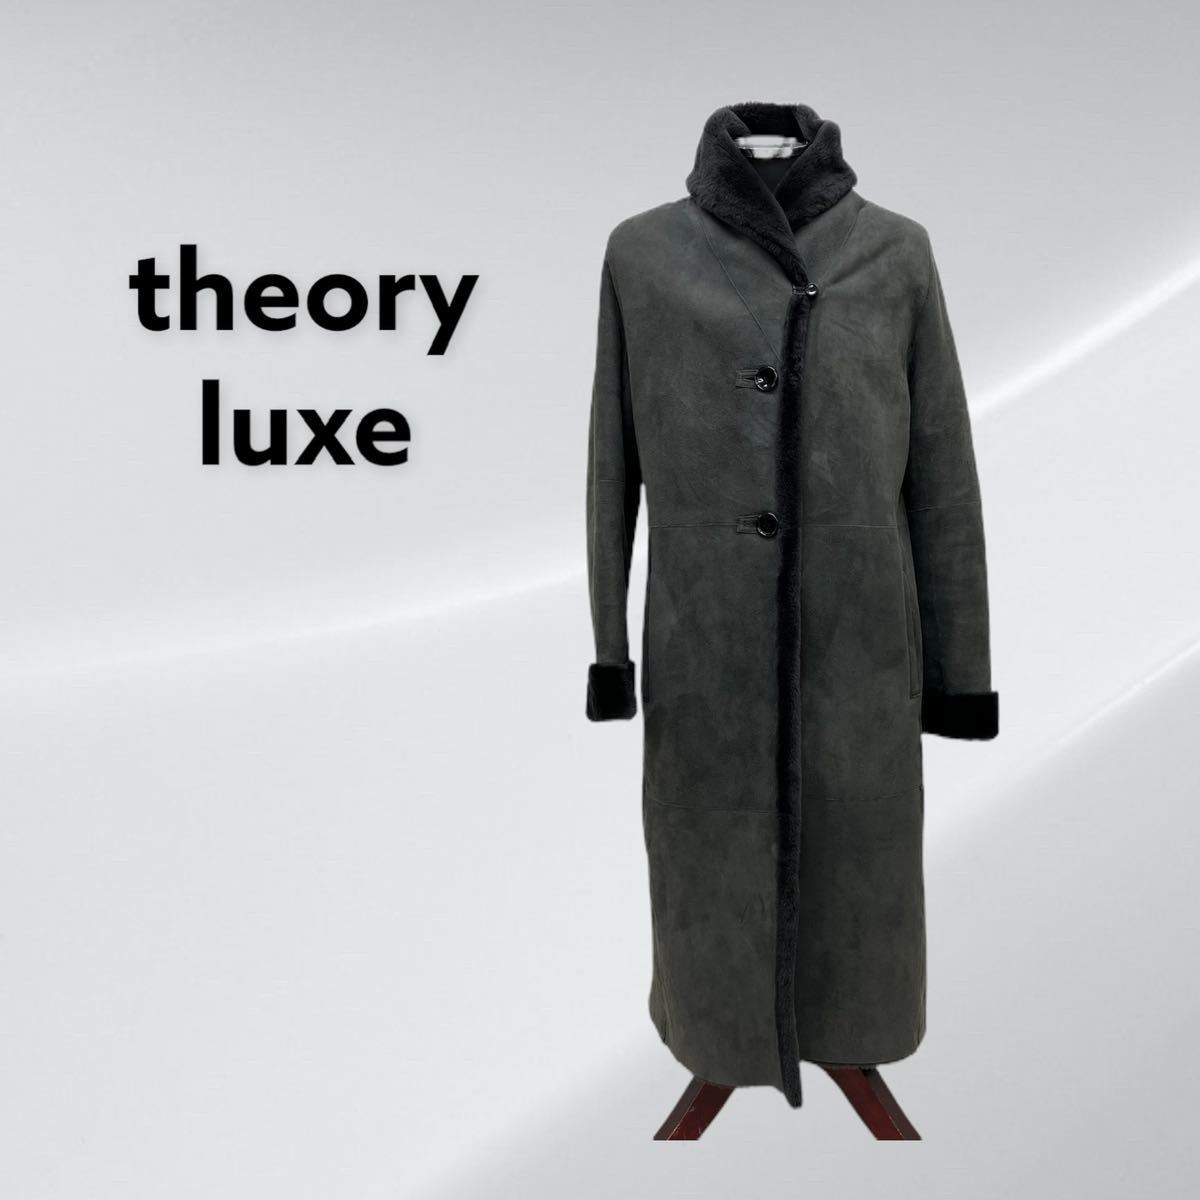 theory luxe ロングコート38-